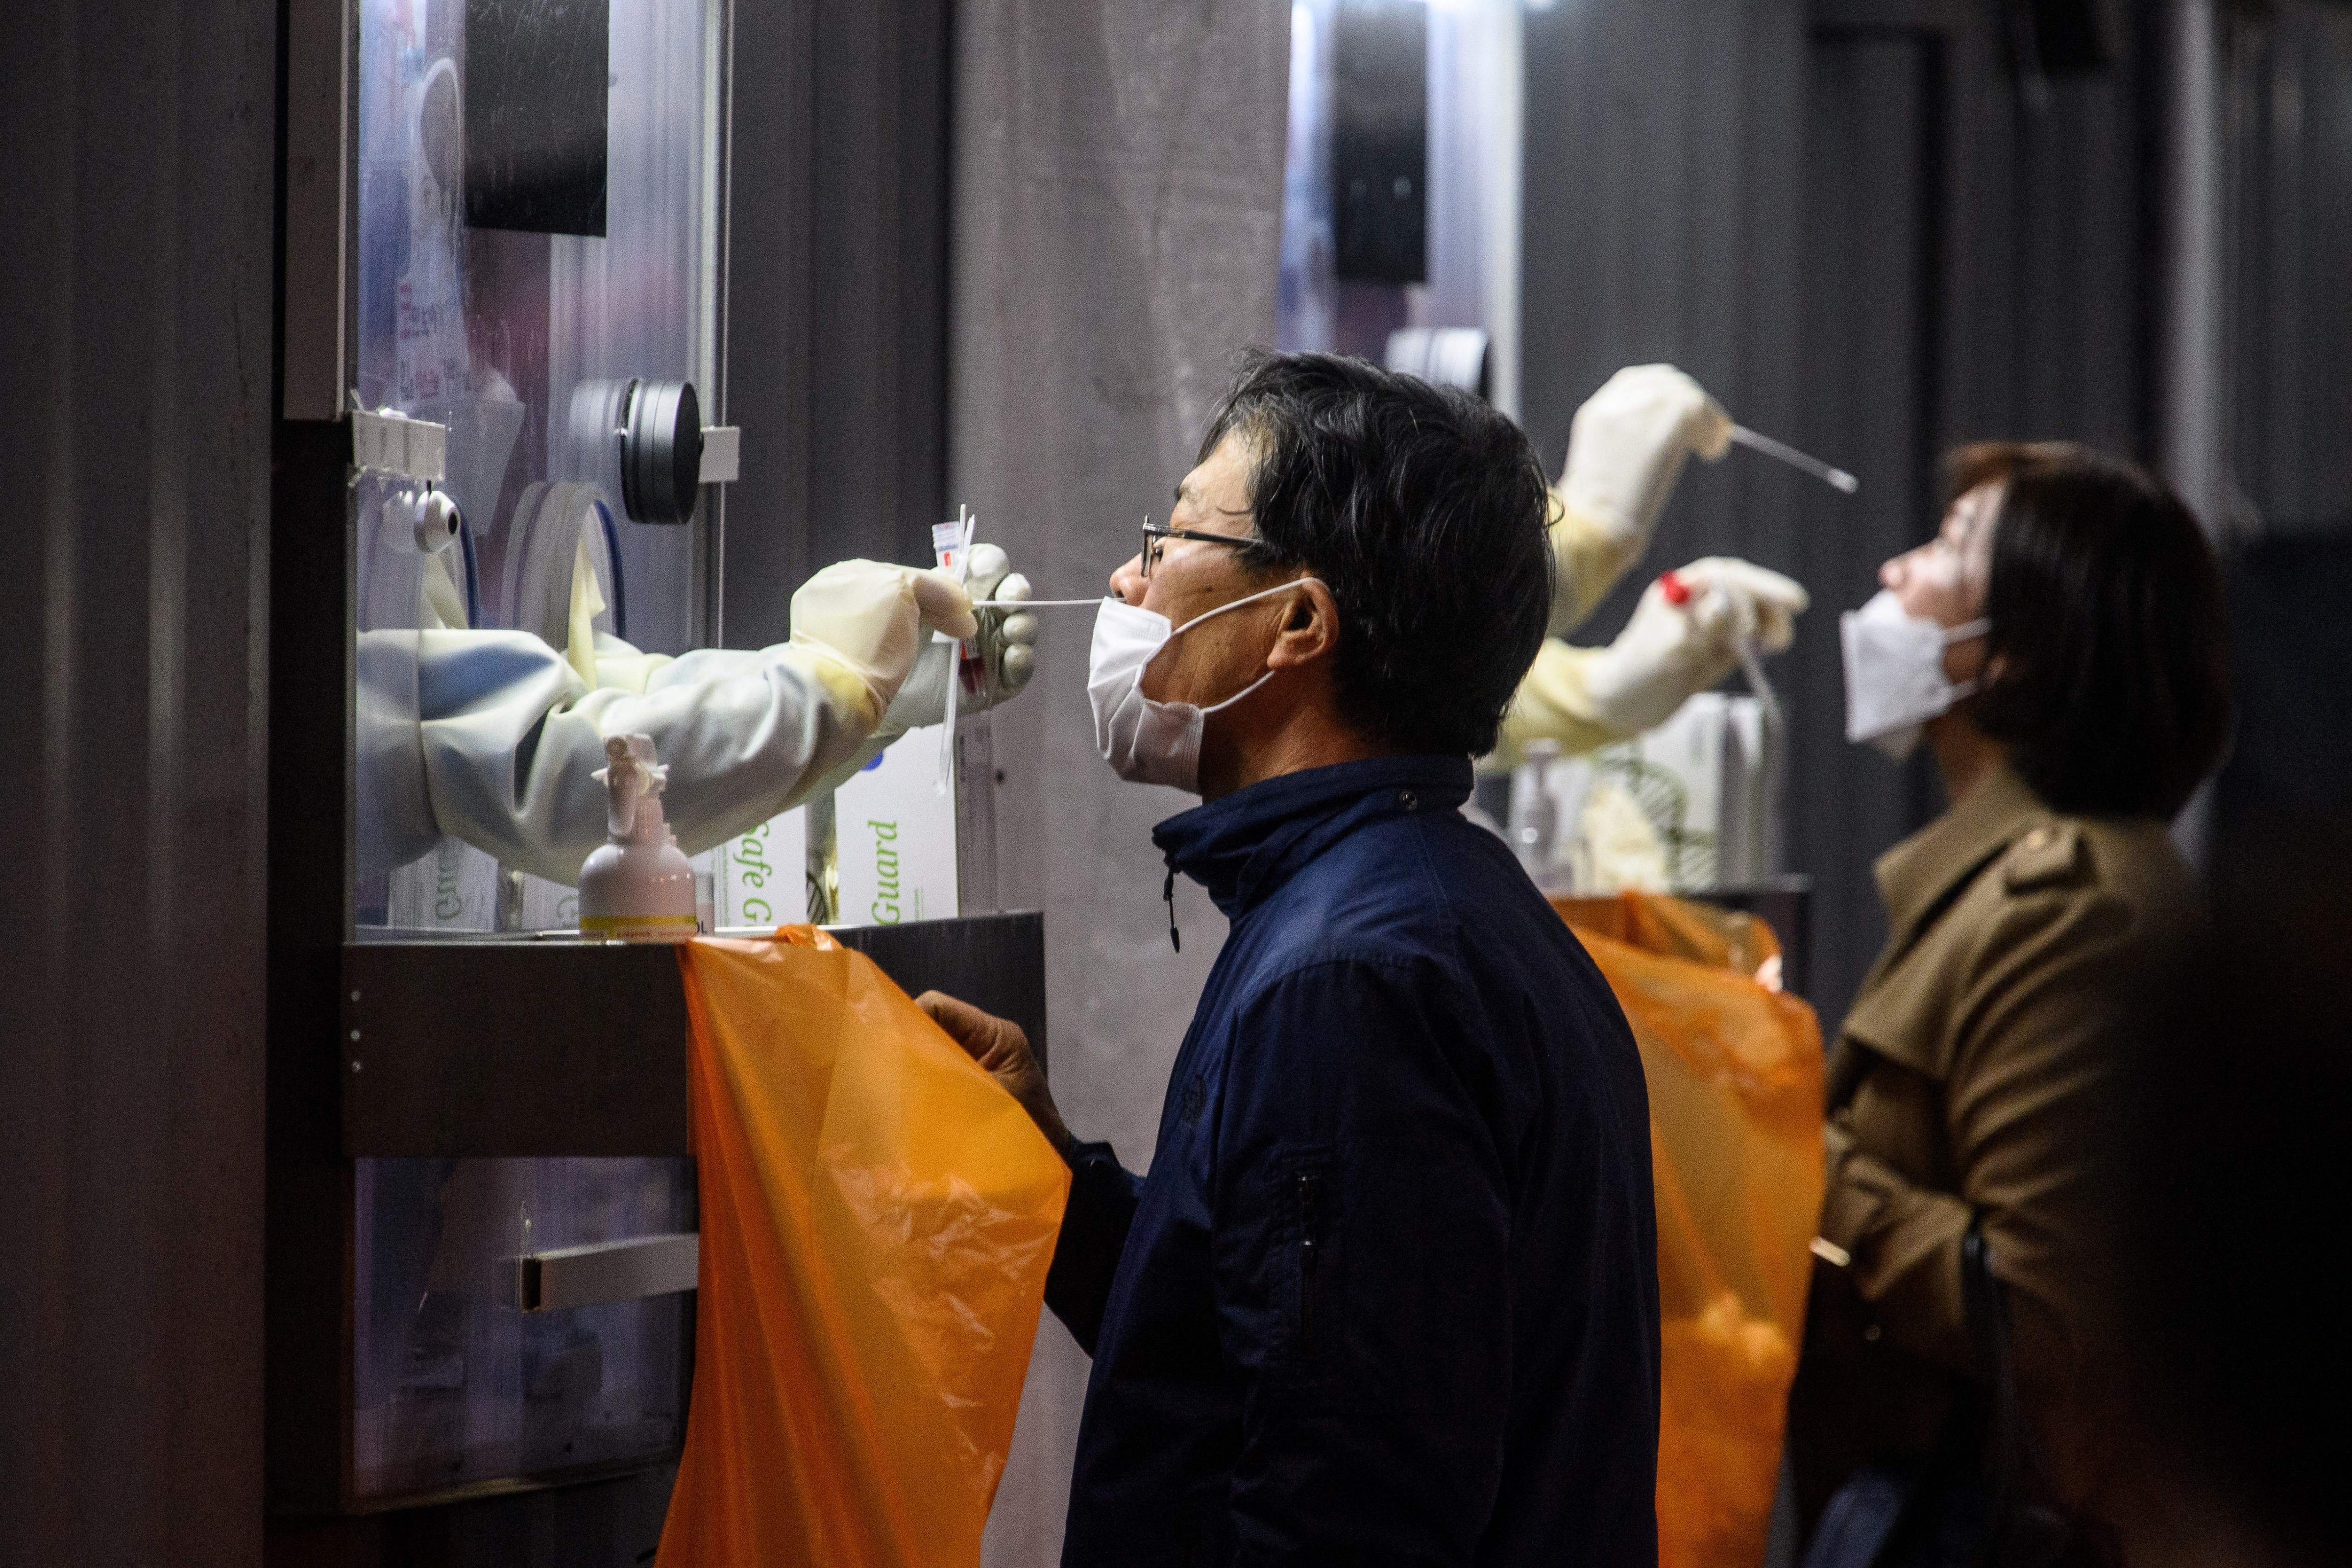 A man and woman undergo PCR (polymerase chain reaction) tests at a Covid-19 coronavirus testing centre in Seoul on November 3, 2021. (Anthony Wallace/AFP via Getty Images)